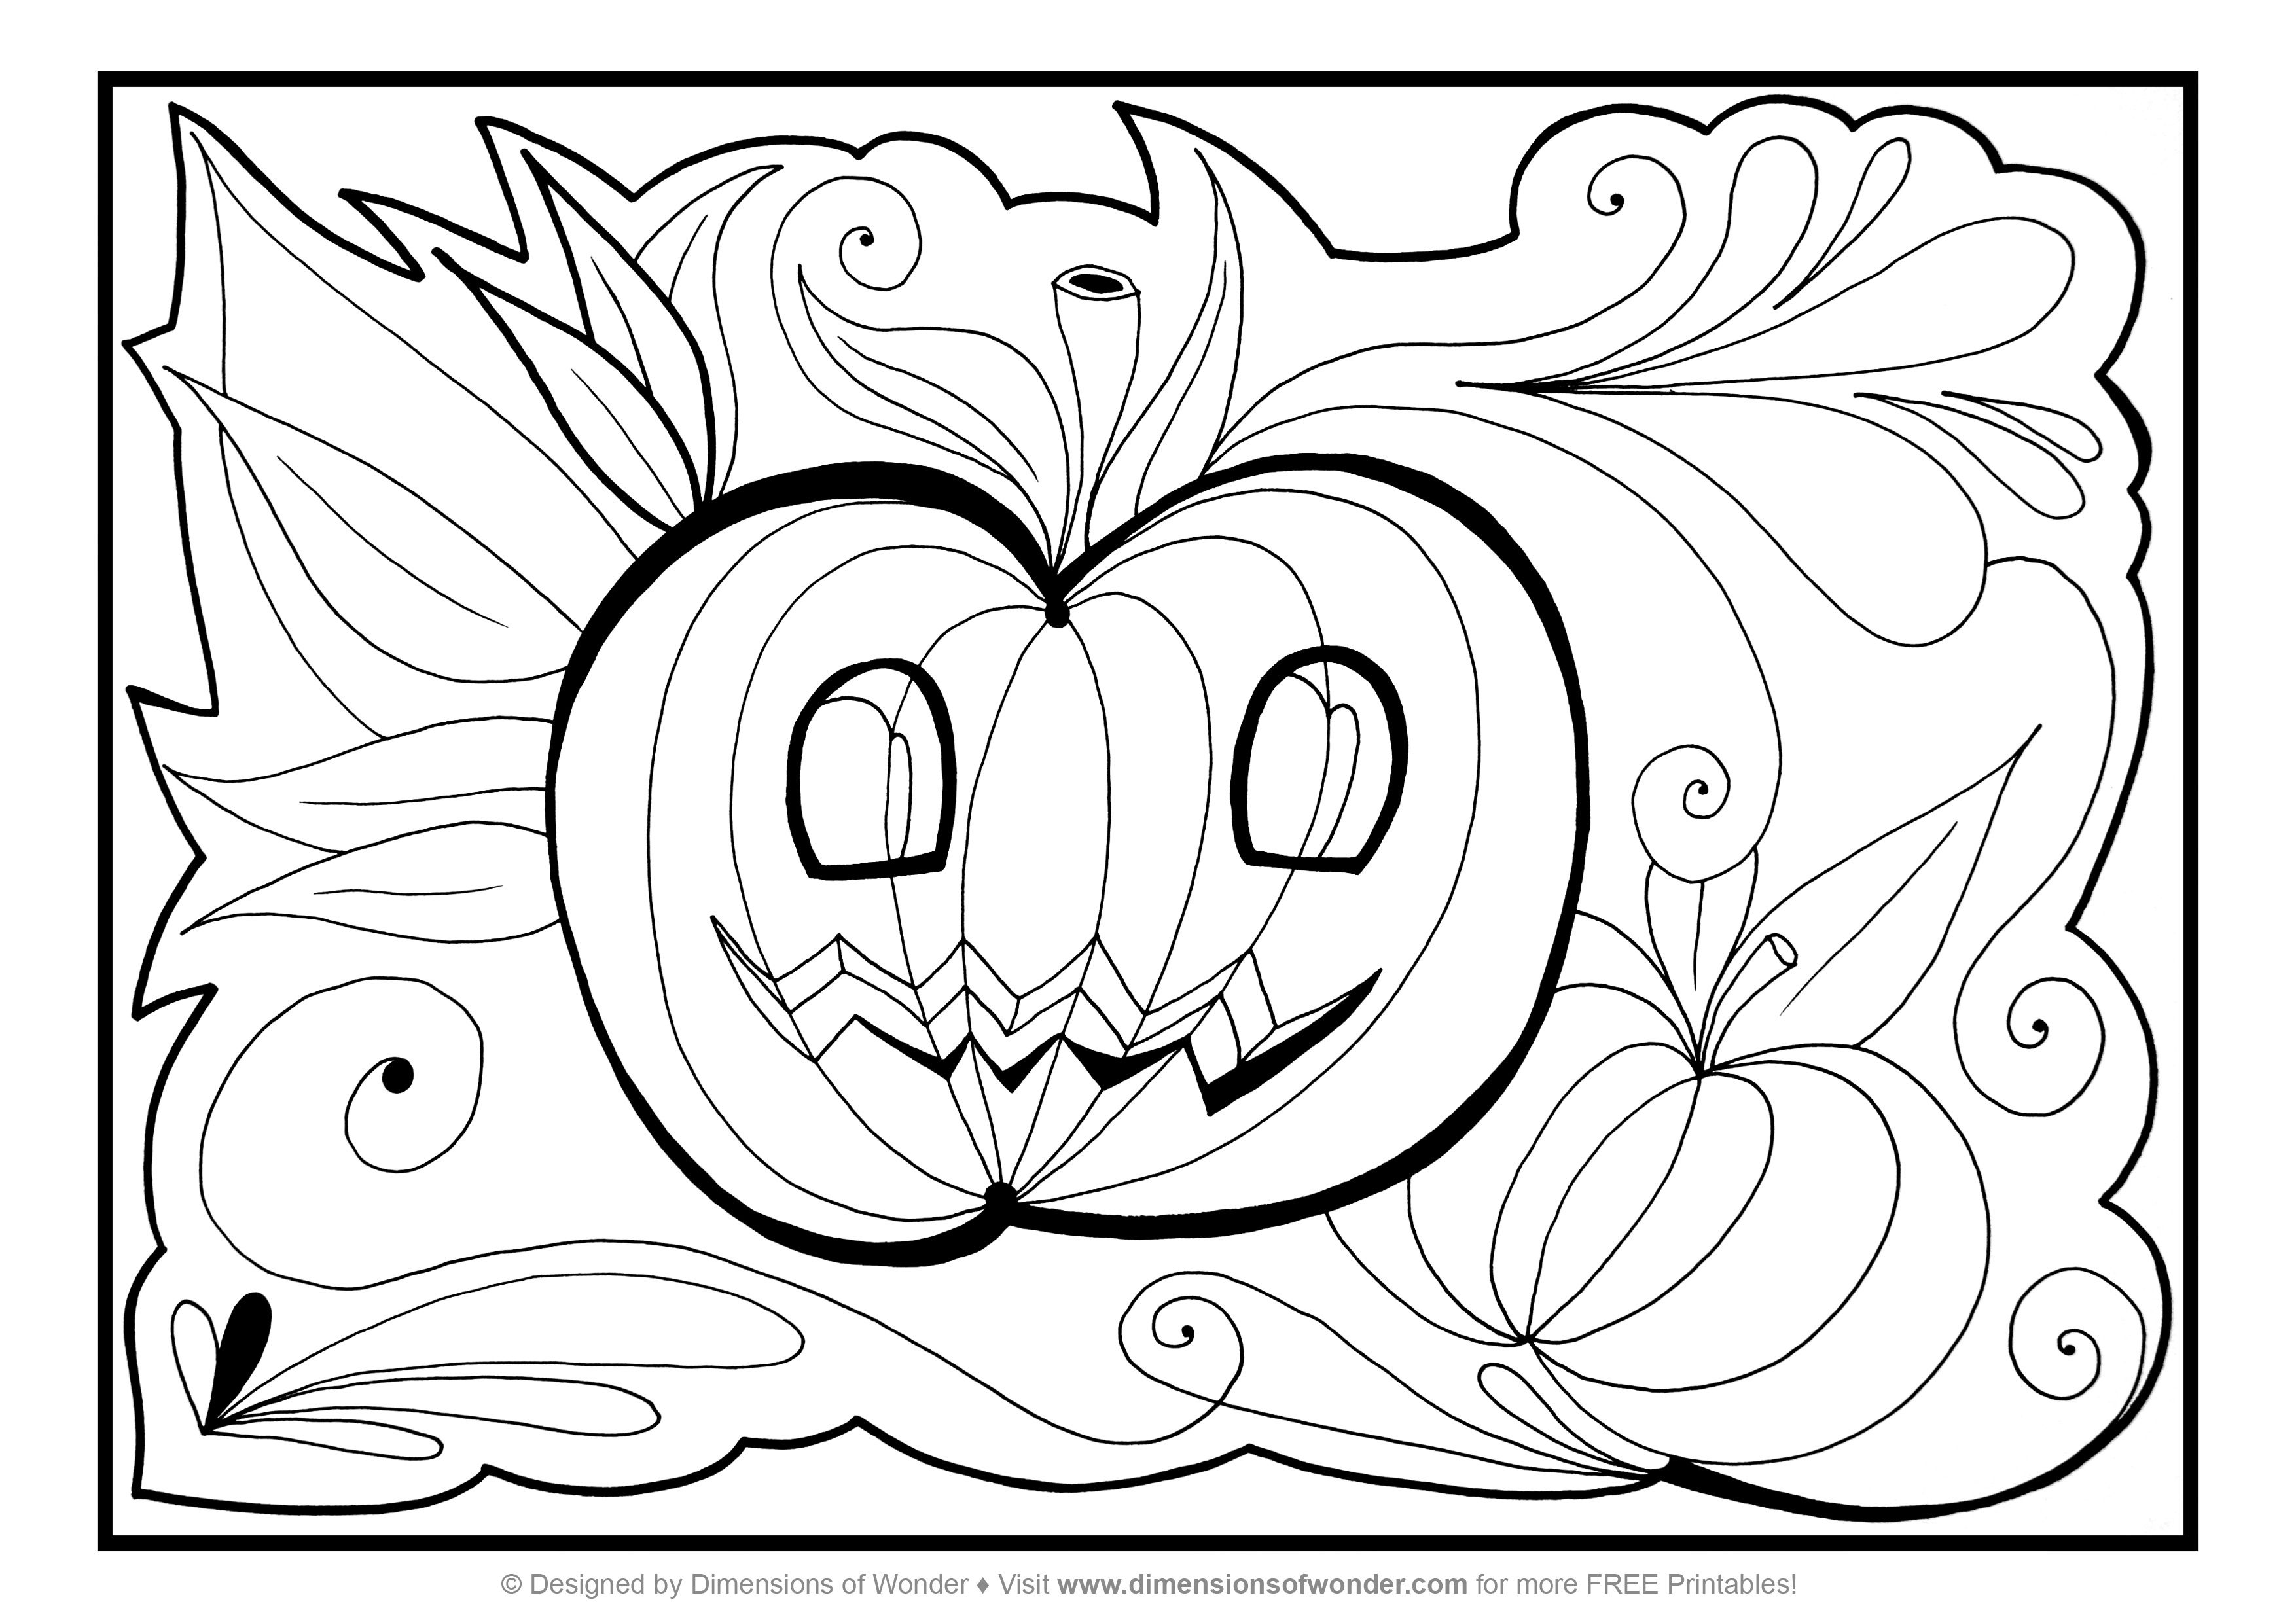 free-halloween-coloring-pages-free-printable-scary-download-free-halloween-coloring-pages-free